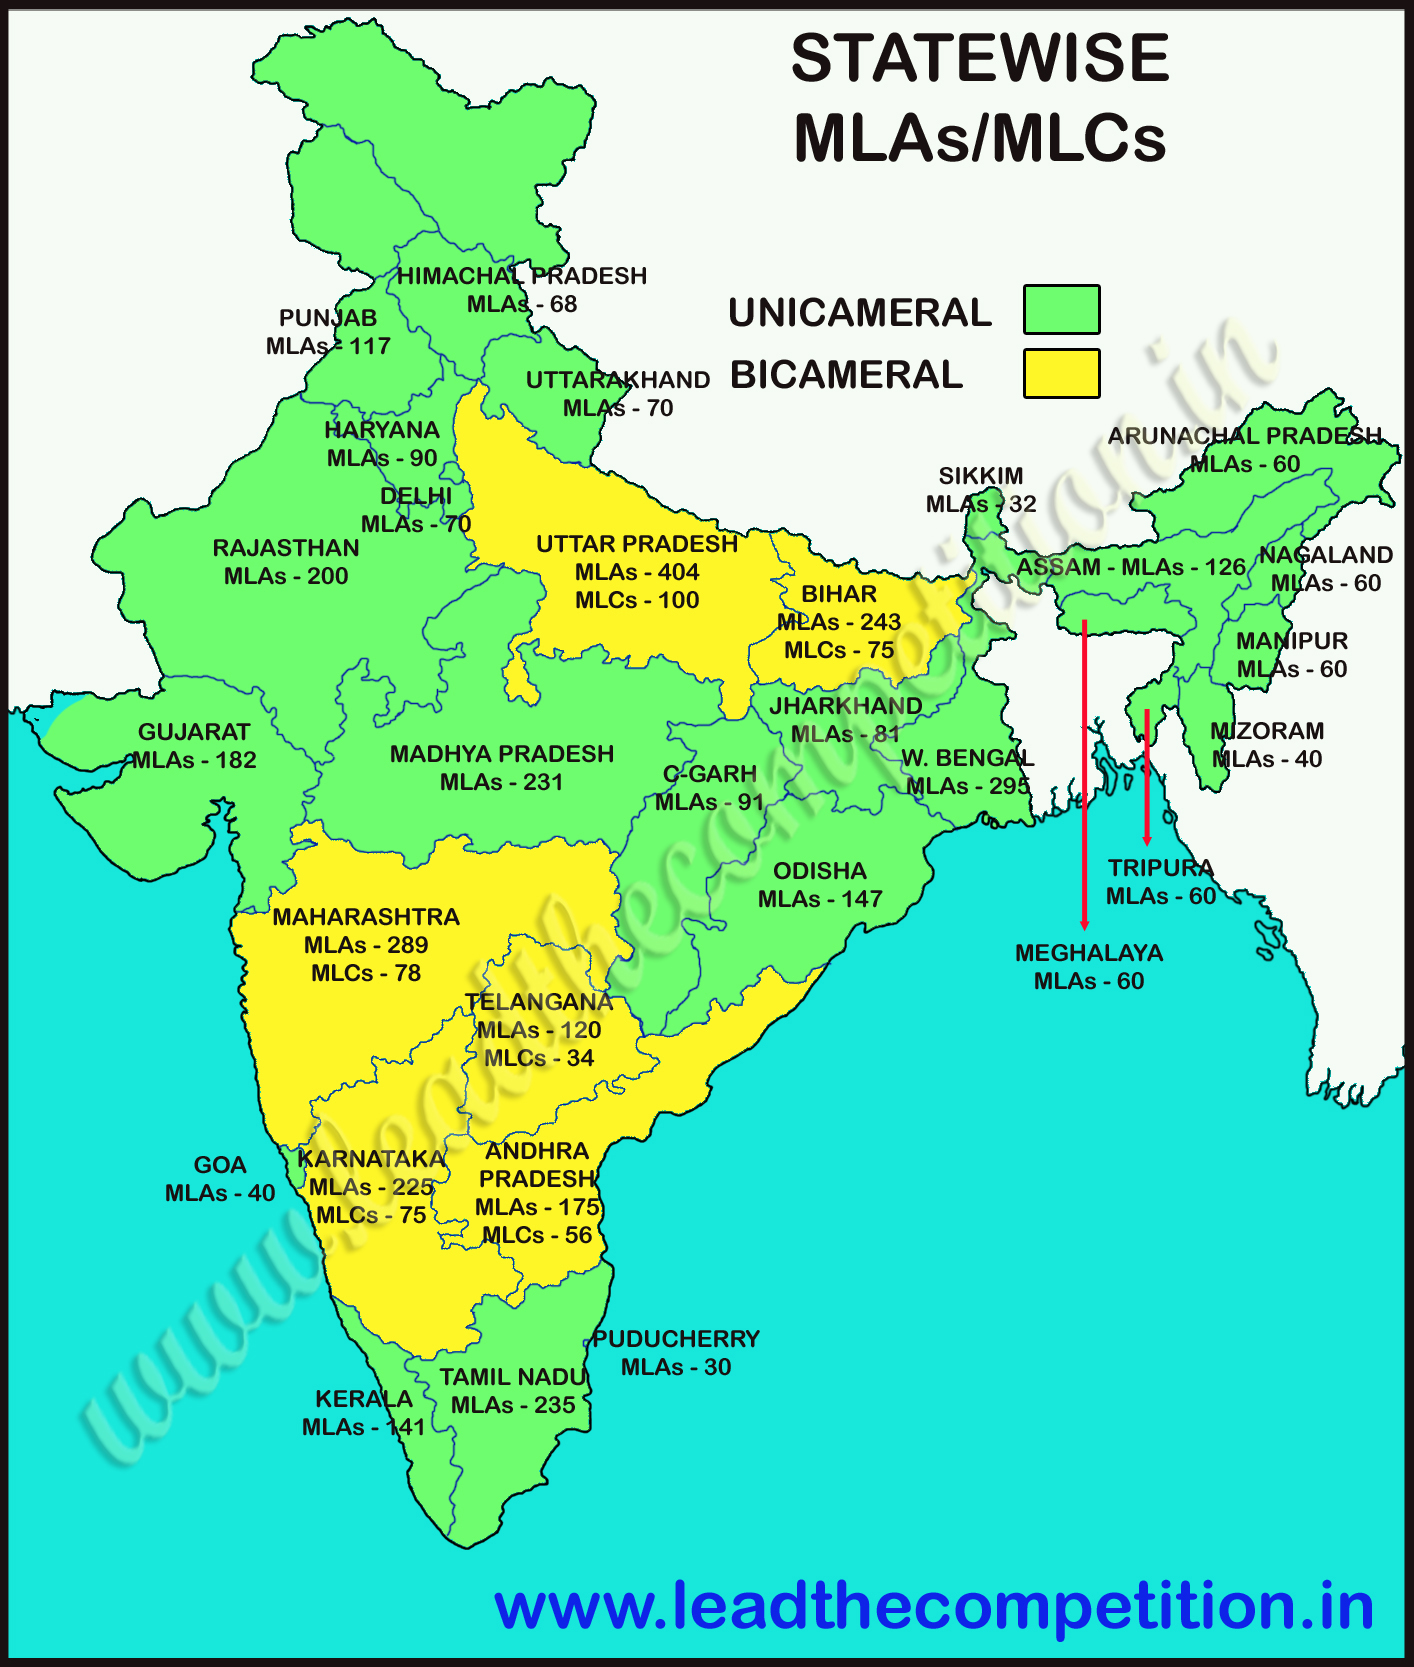 Statewise MLAs and MLCs